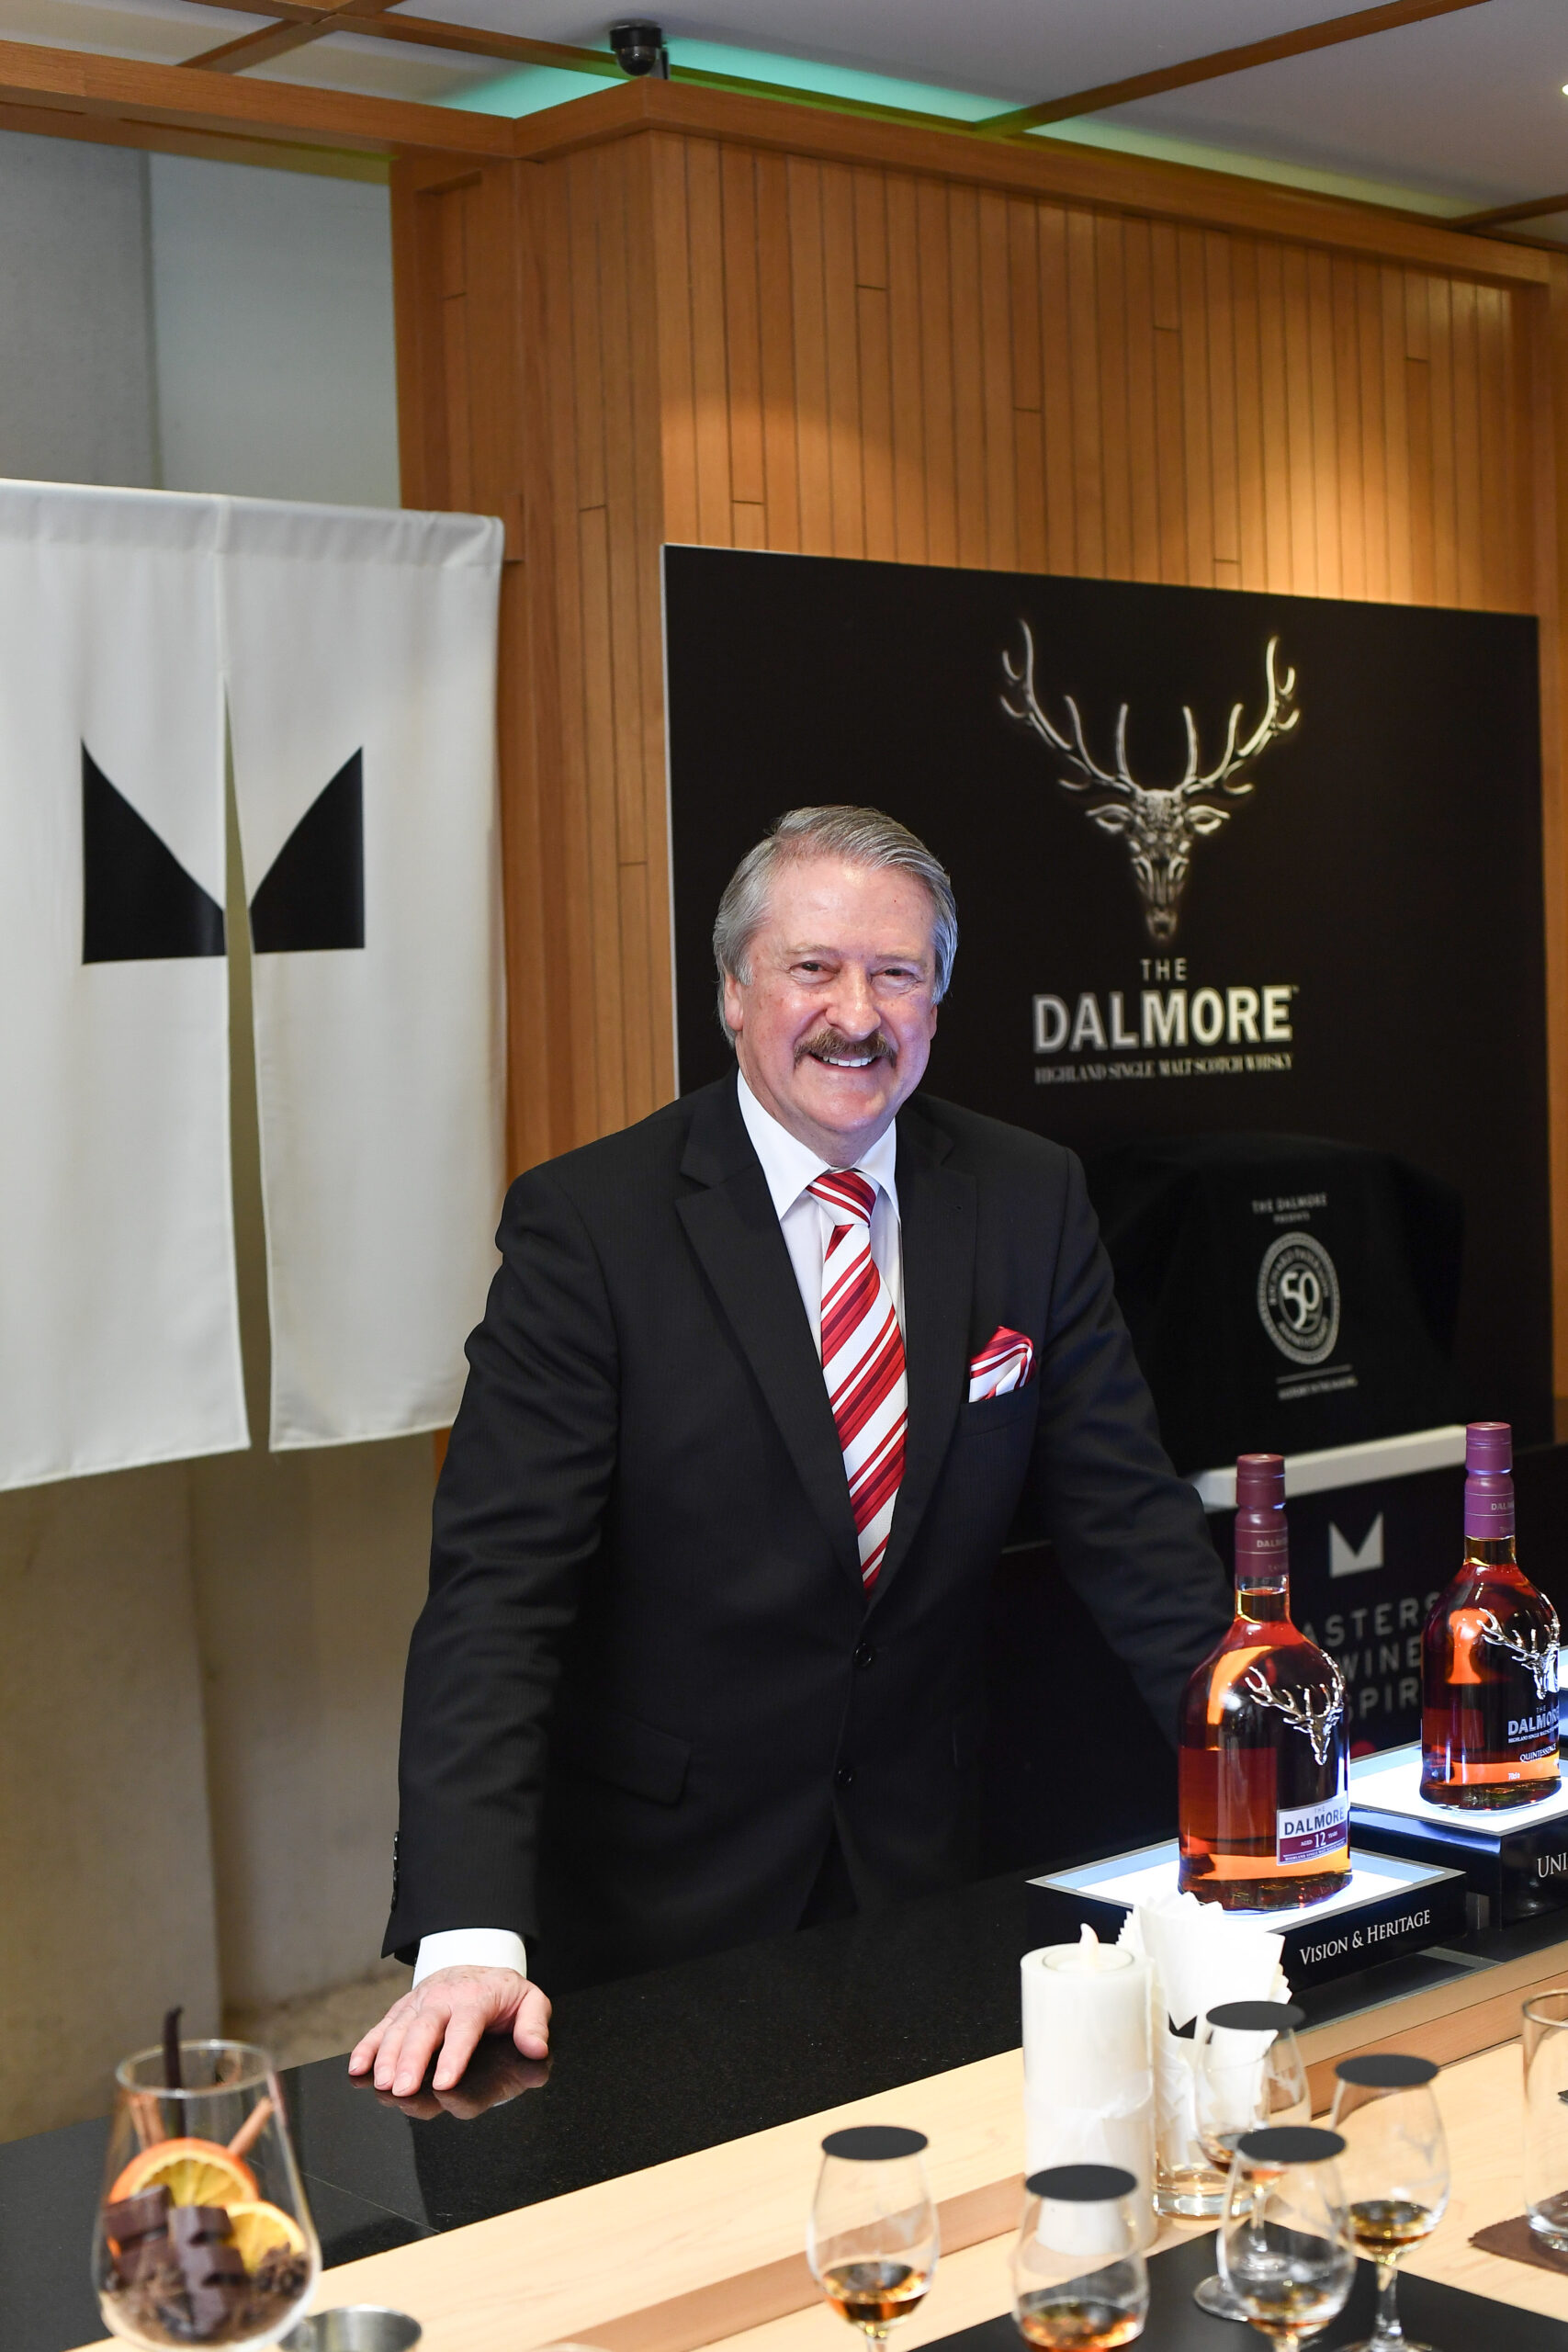 Richard Paterson, Master Blender The Dalmore, hosted a bespoke tasting to showcase The Dalmore’s rich heritage and artistry